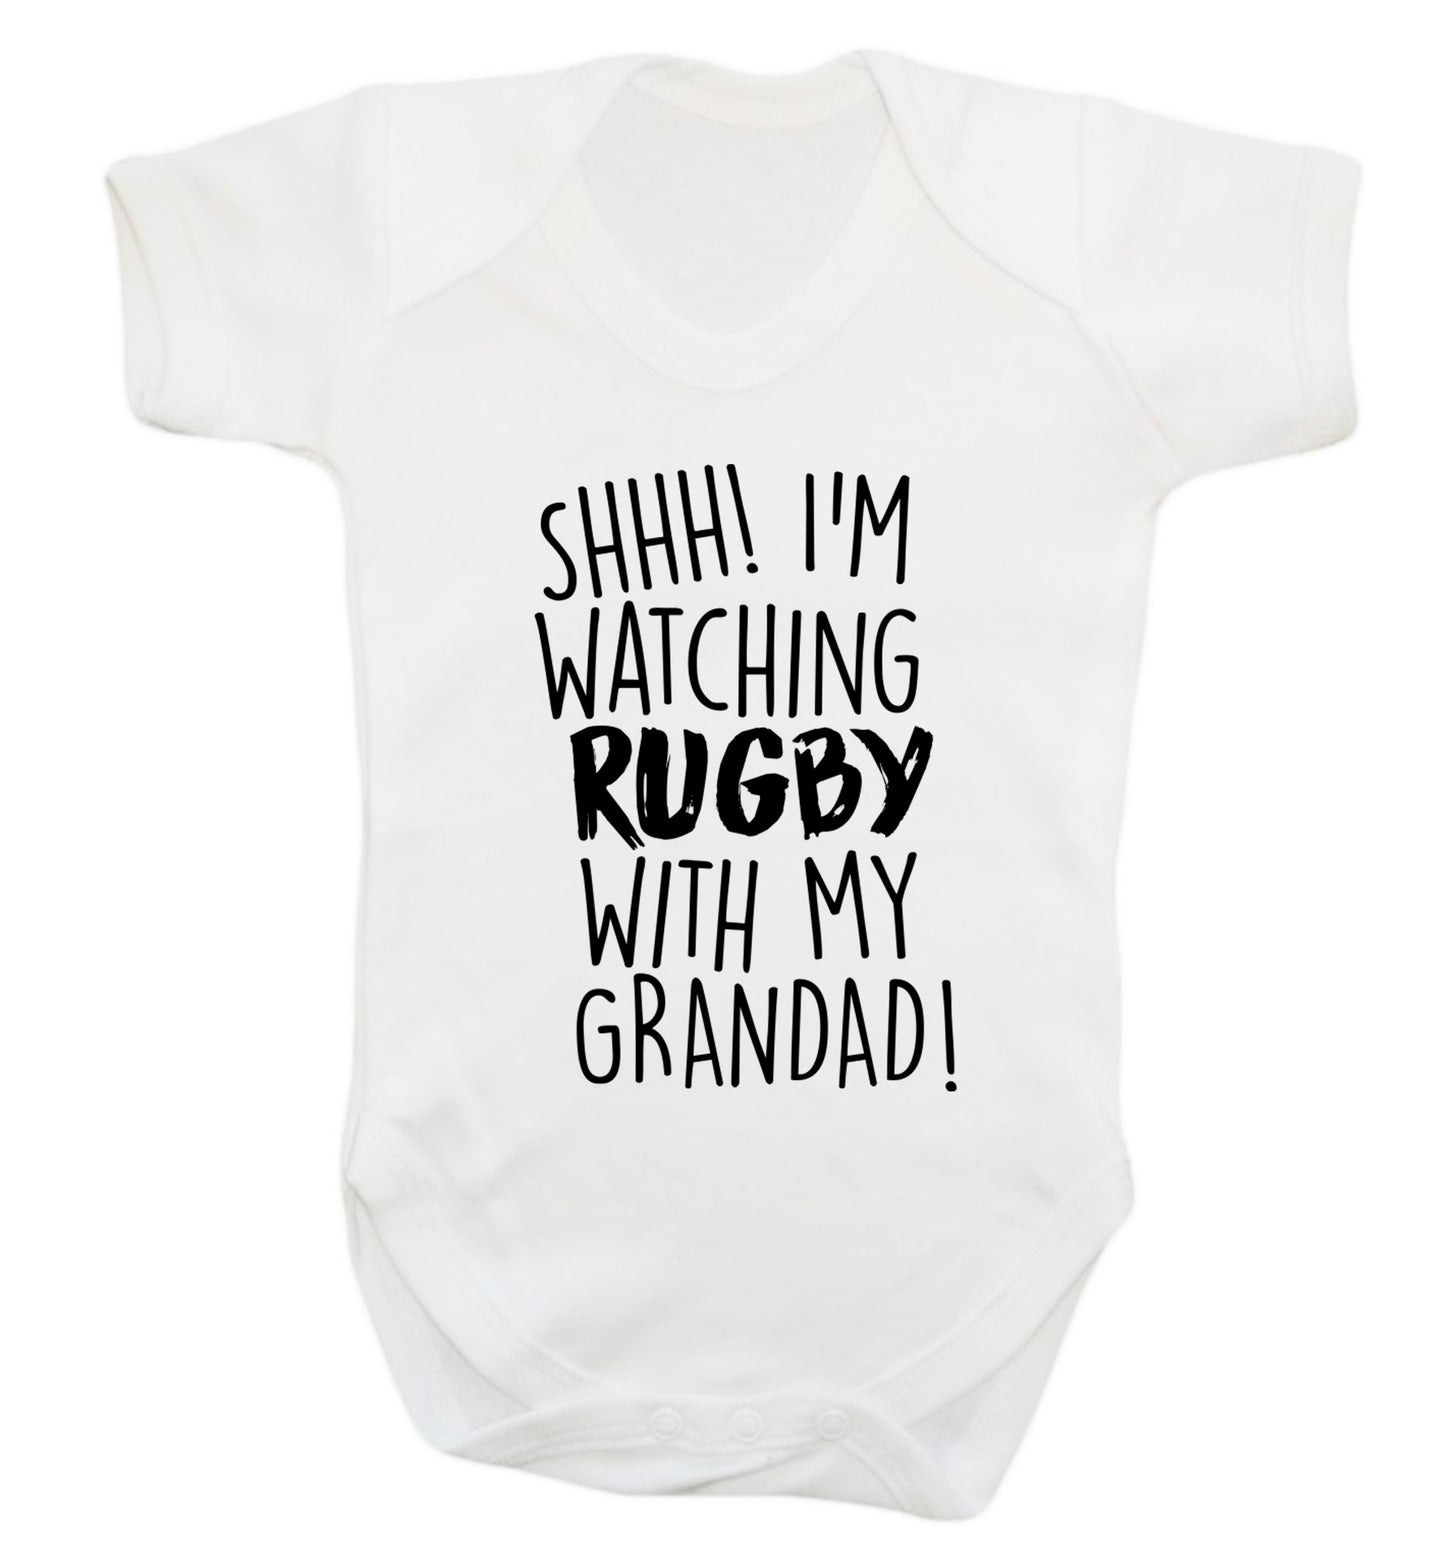 Shh I'm watching rugby with my grandad Baby Vest white 18-24 months